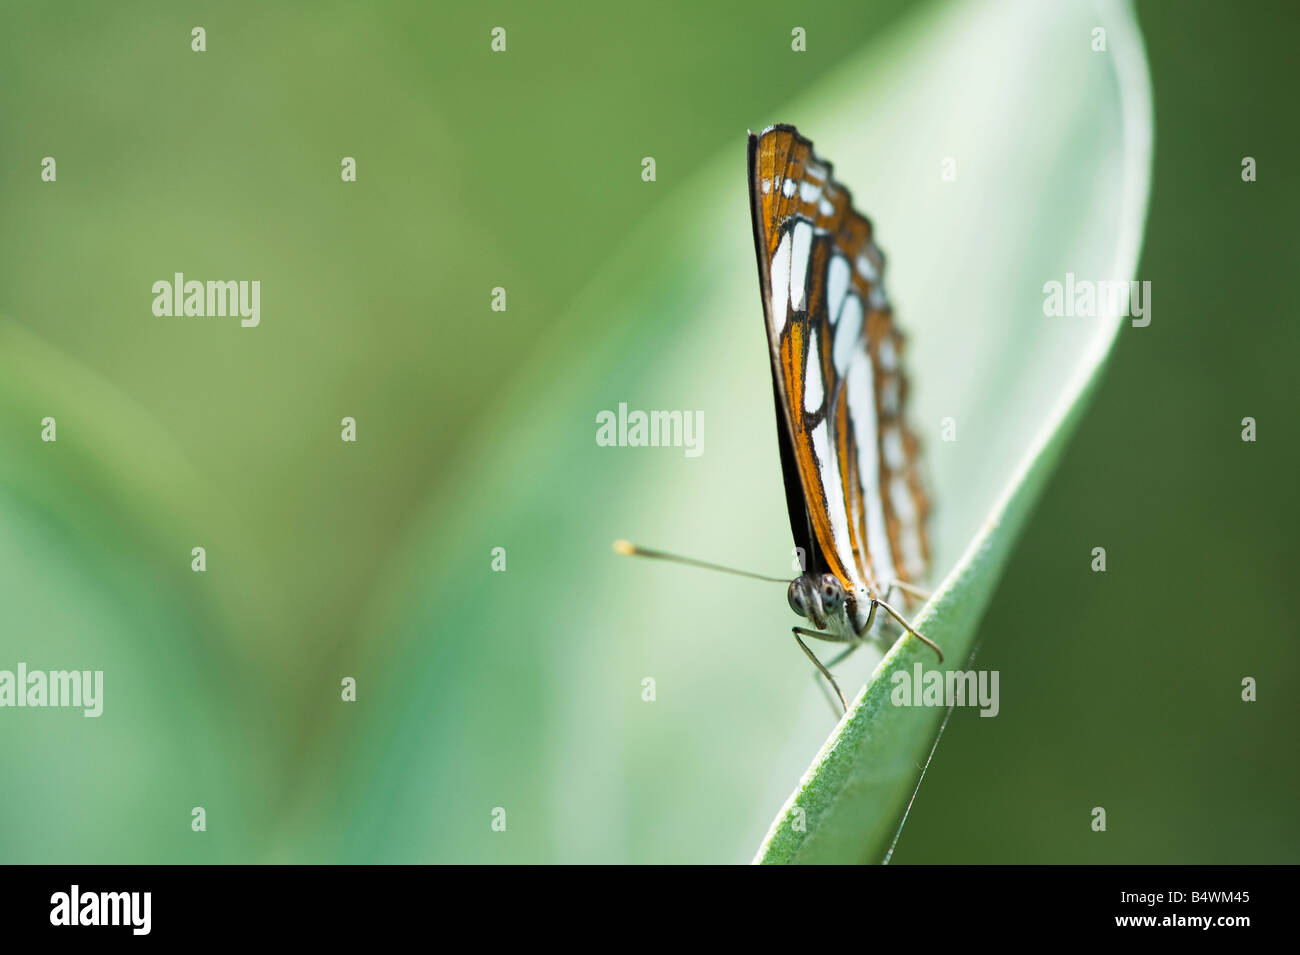 Neptis hylas. Common Sailor butterfly in the indian countryside. Andhra Pradesh, India Stock Photo